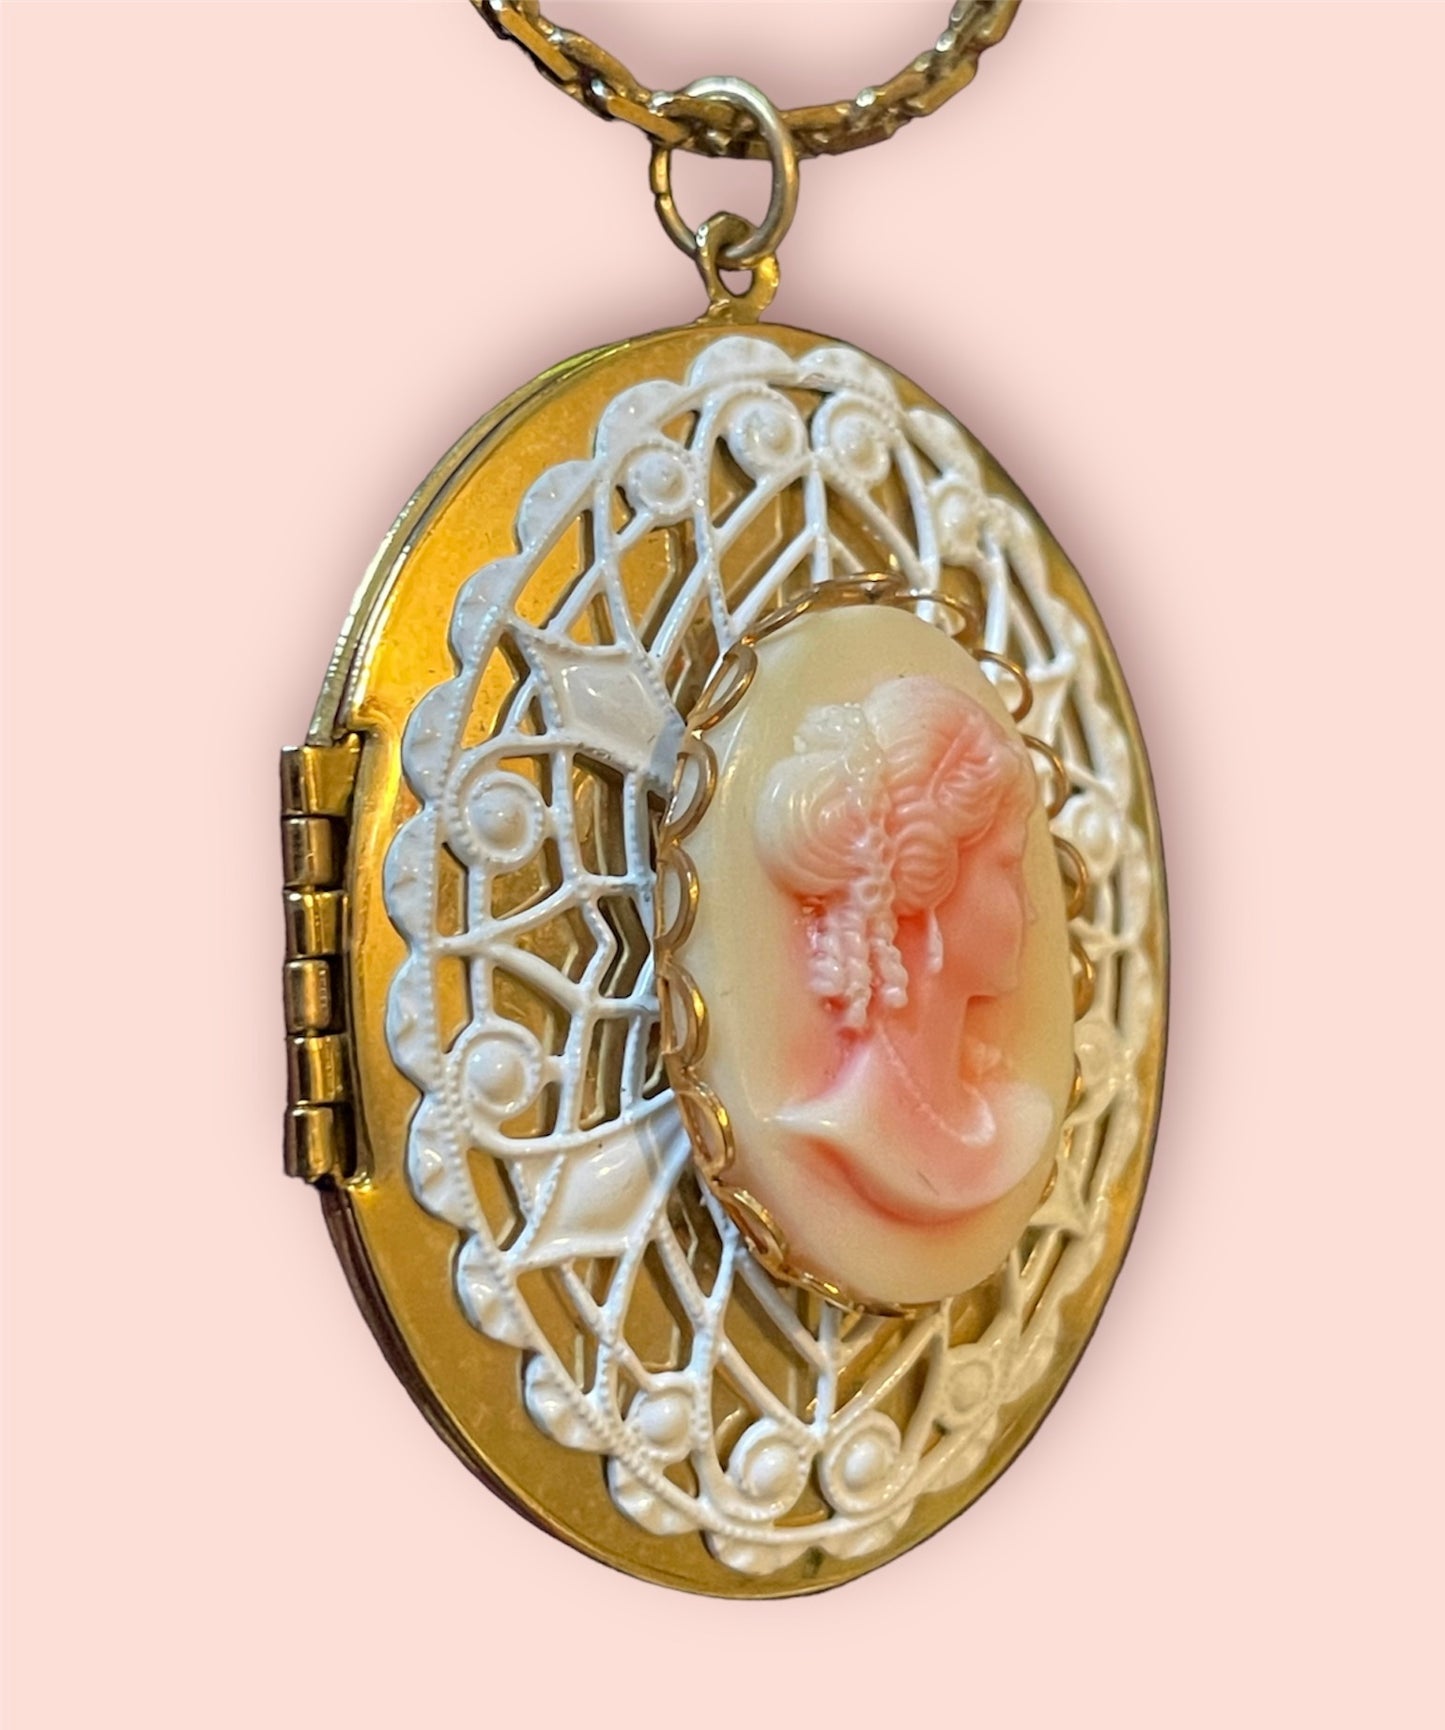 Pink & White Celluloid Lace Gold Cameo Vintage Locket Necklace